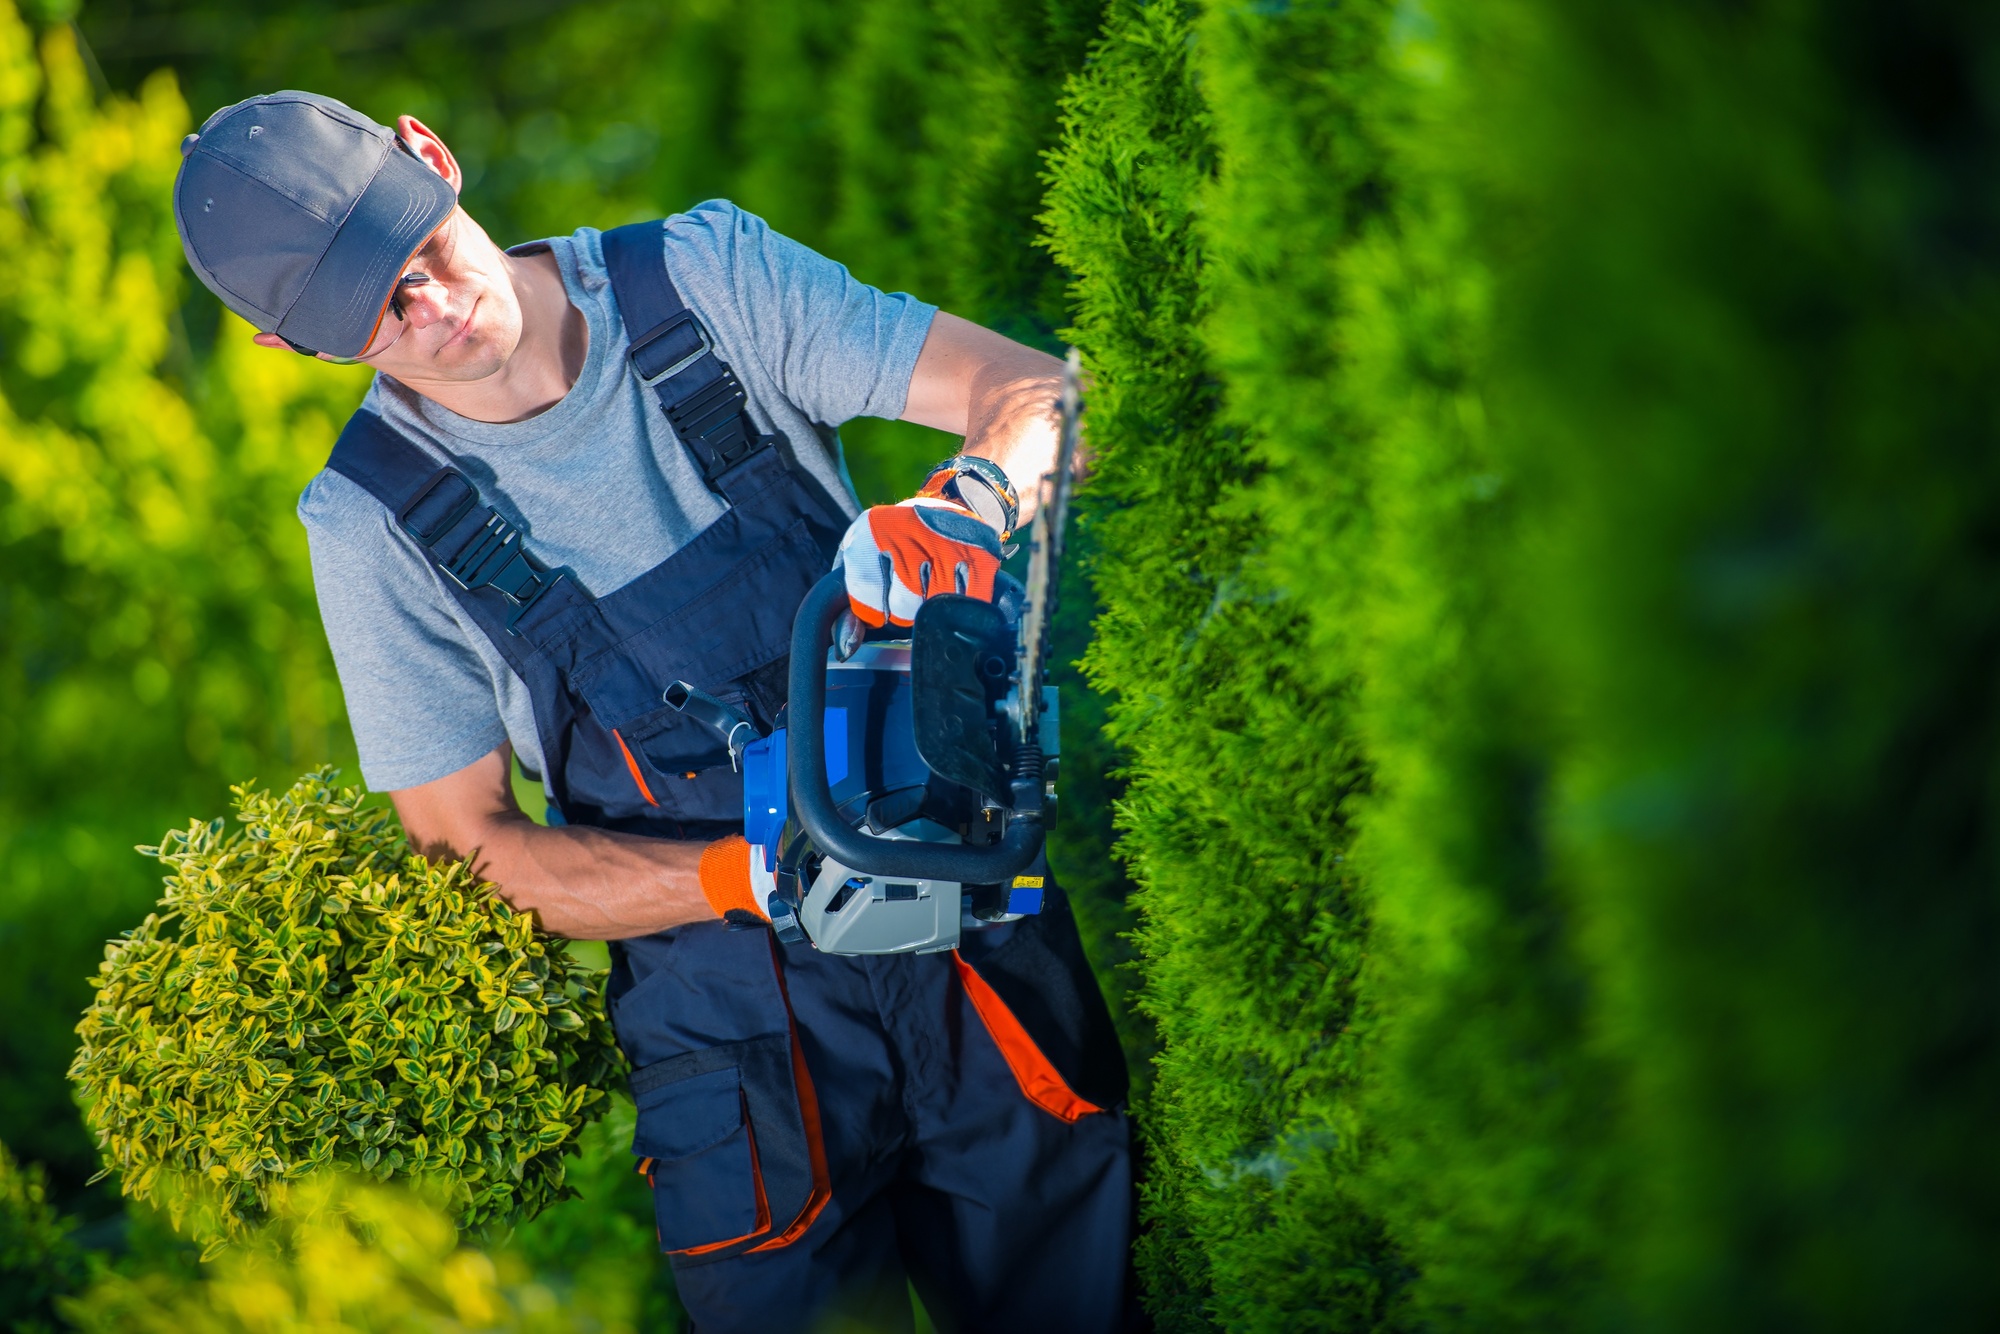 Finding the right professionals for a landscaping project requires knowing your options. Here is a guide for homeowners on choosing a landscaping company.